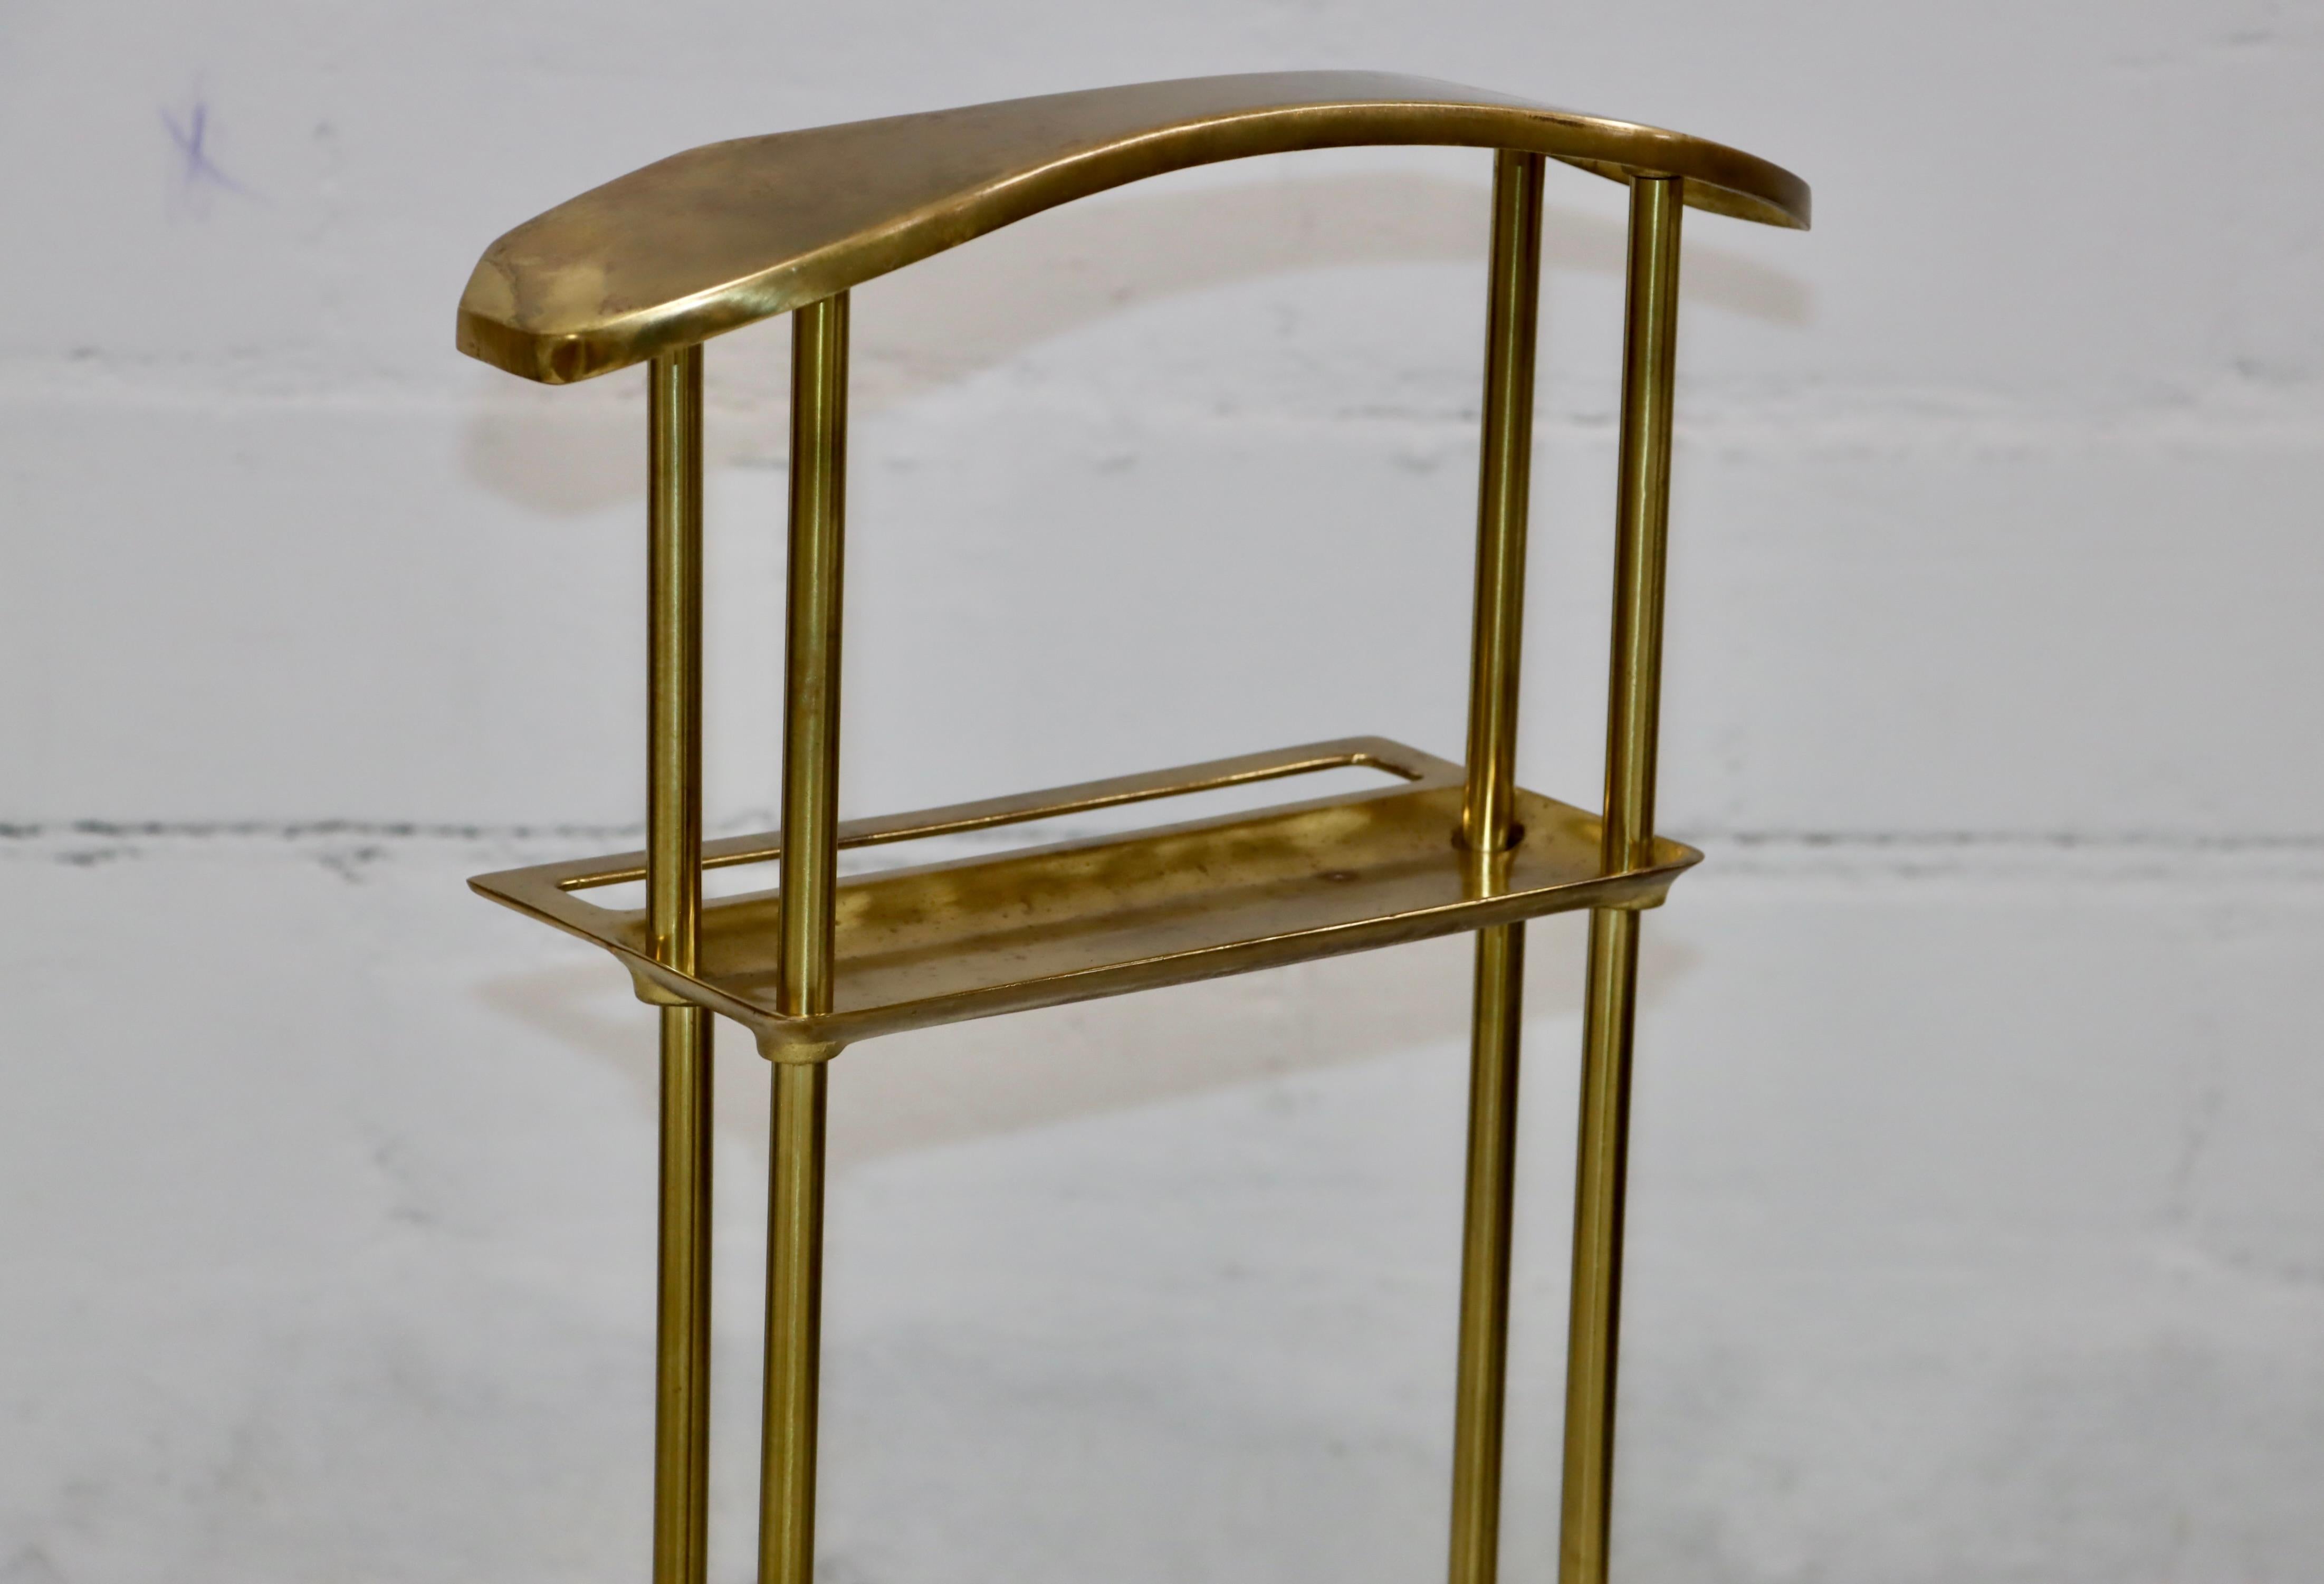 1980's Modernist Brass Valet Stand By Decorative Crafts Inc. For Sale 1